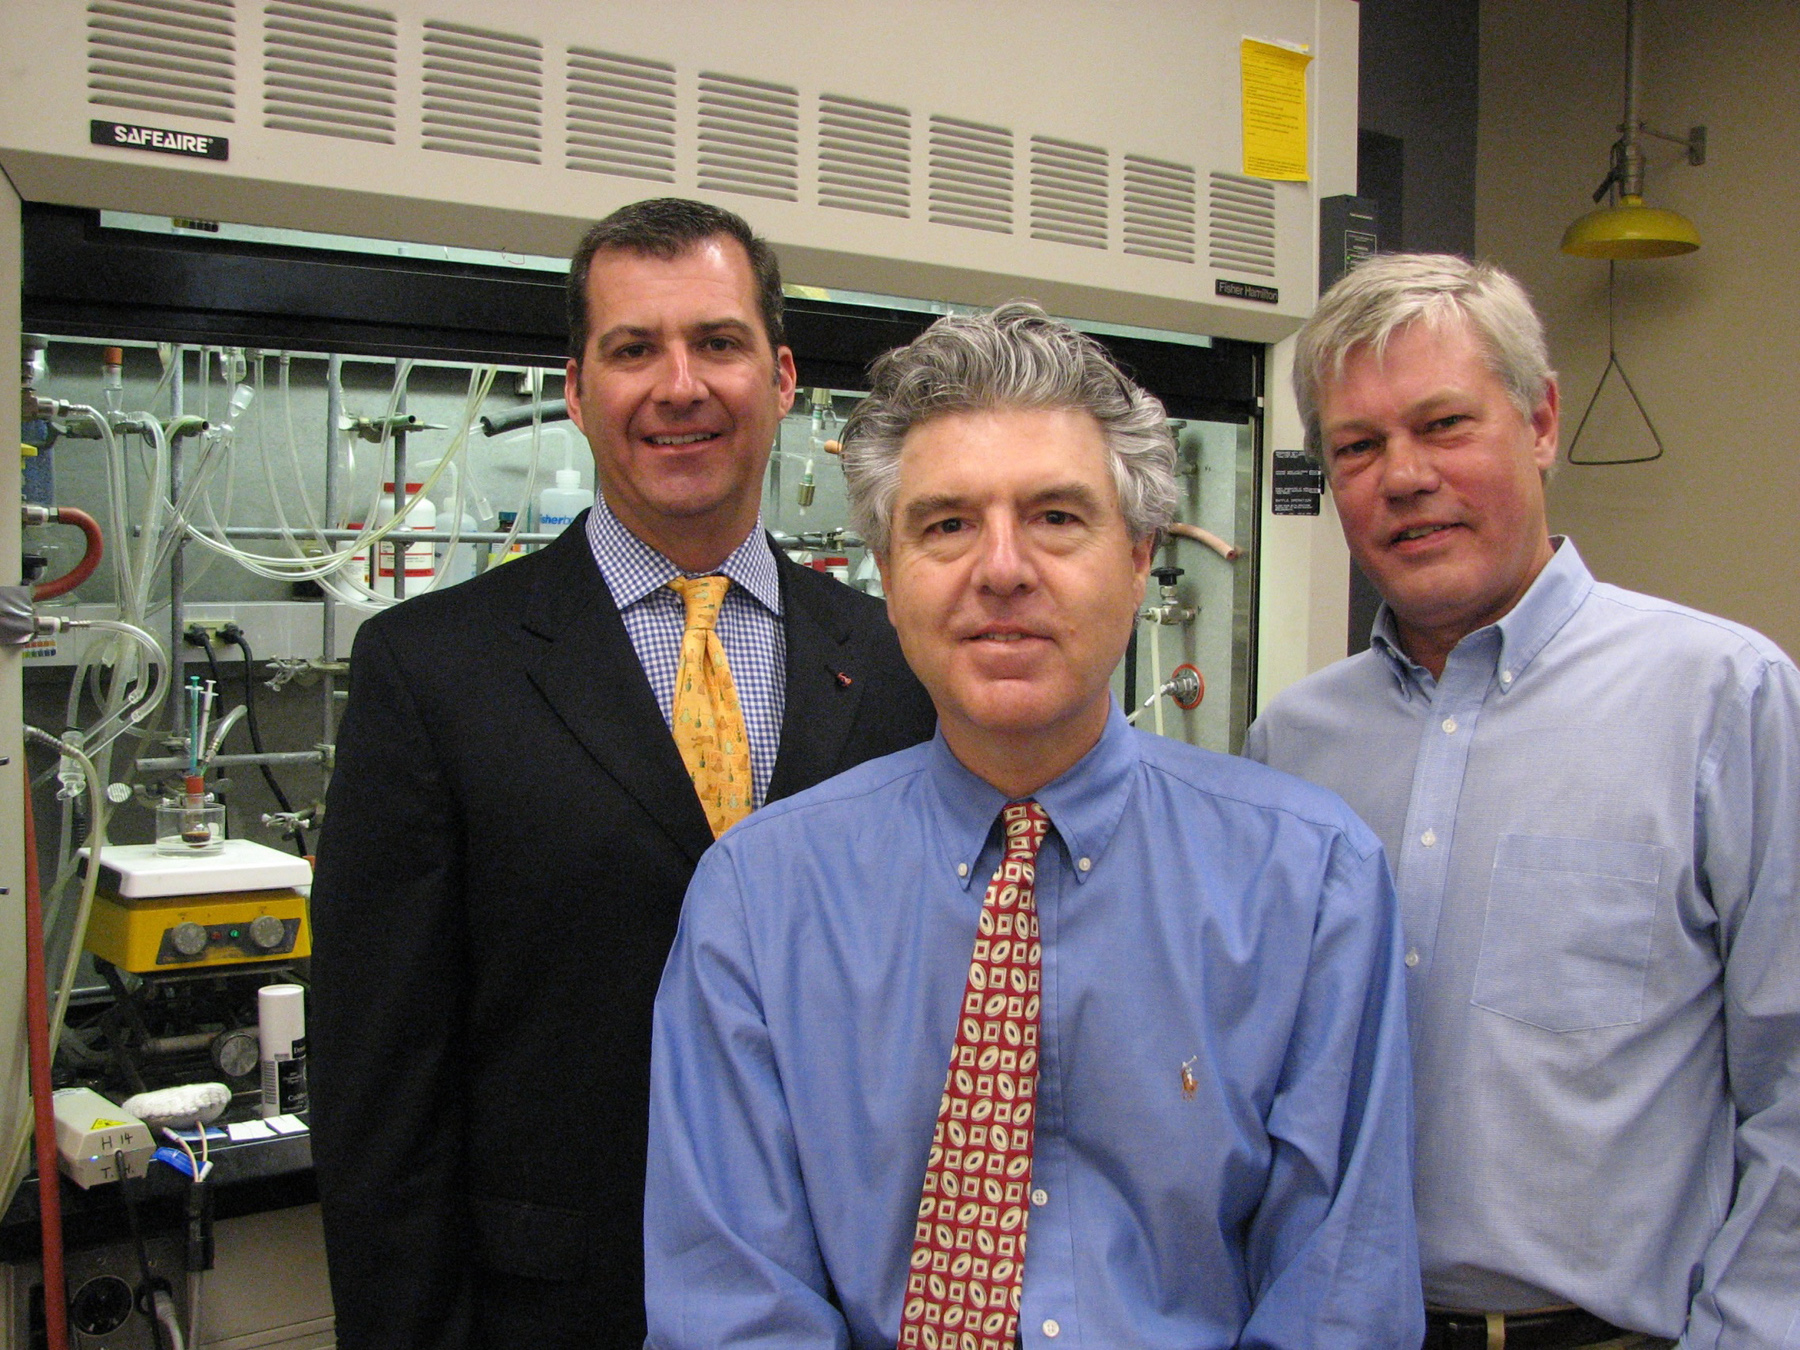 Group photo, left to right: Andrew J. Krouse, Timothy L. Macdonald, Ph.D., and Lloyd S. Gray